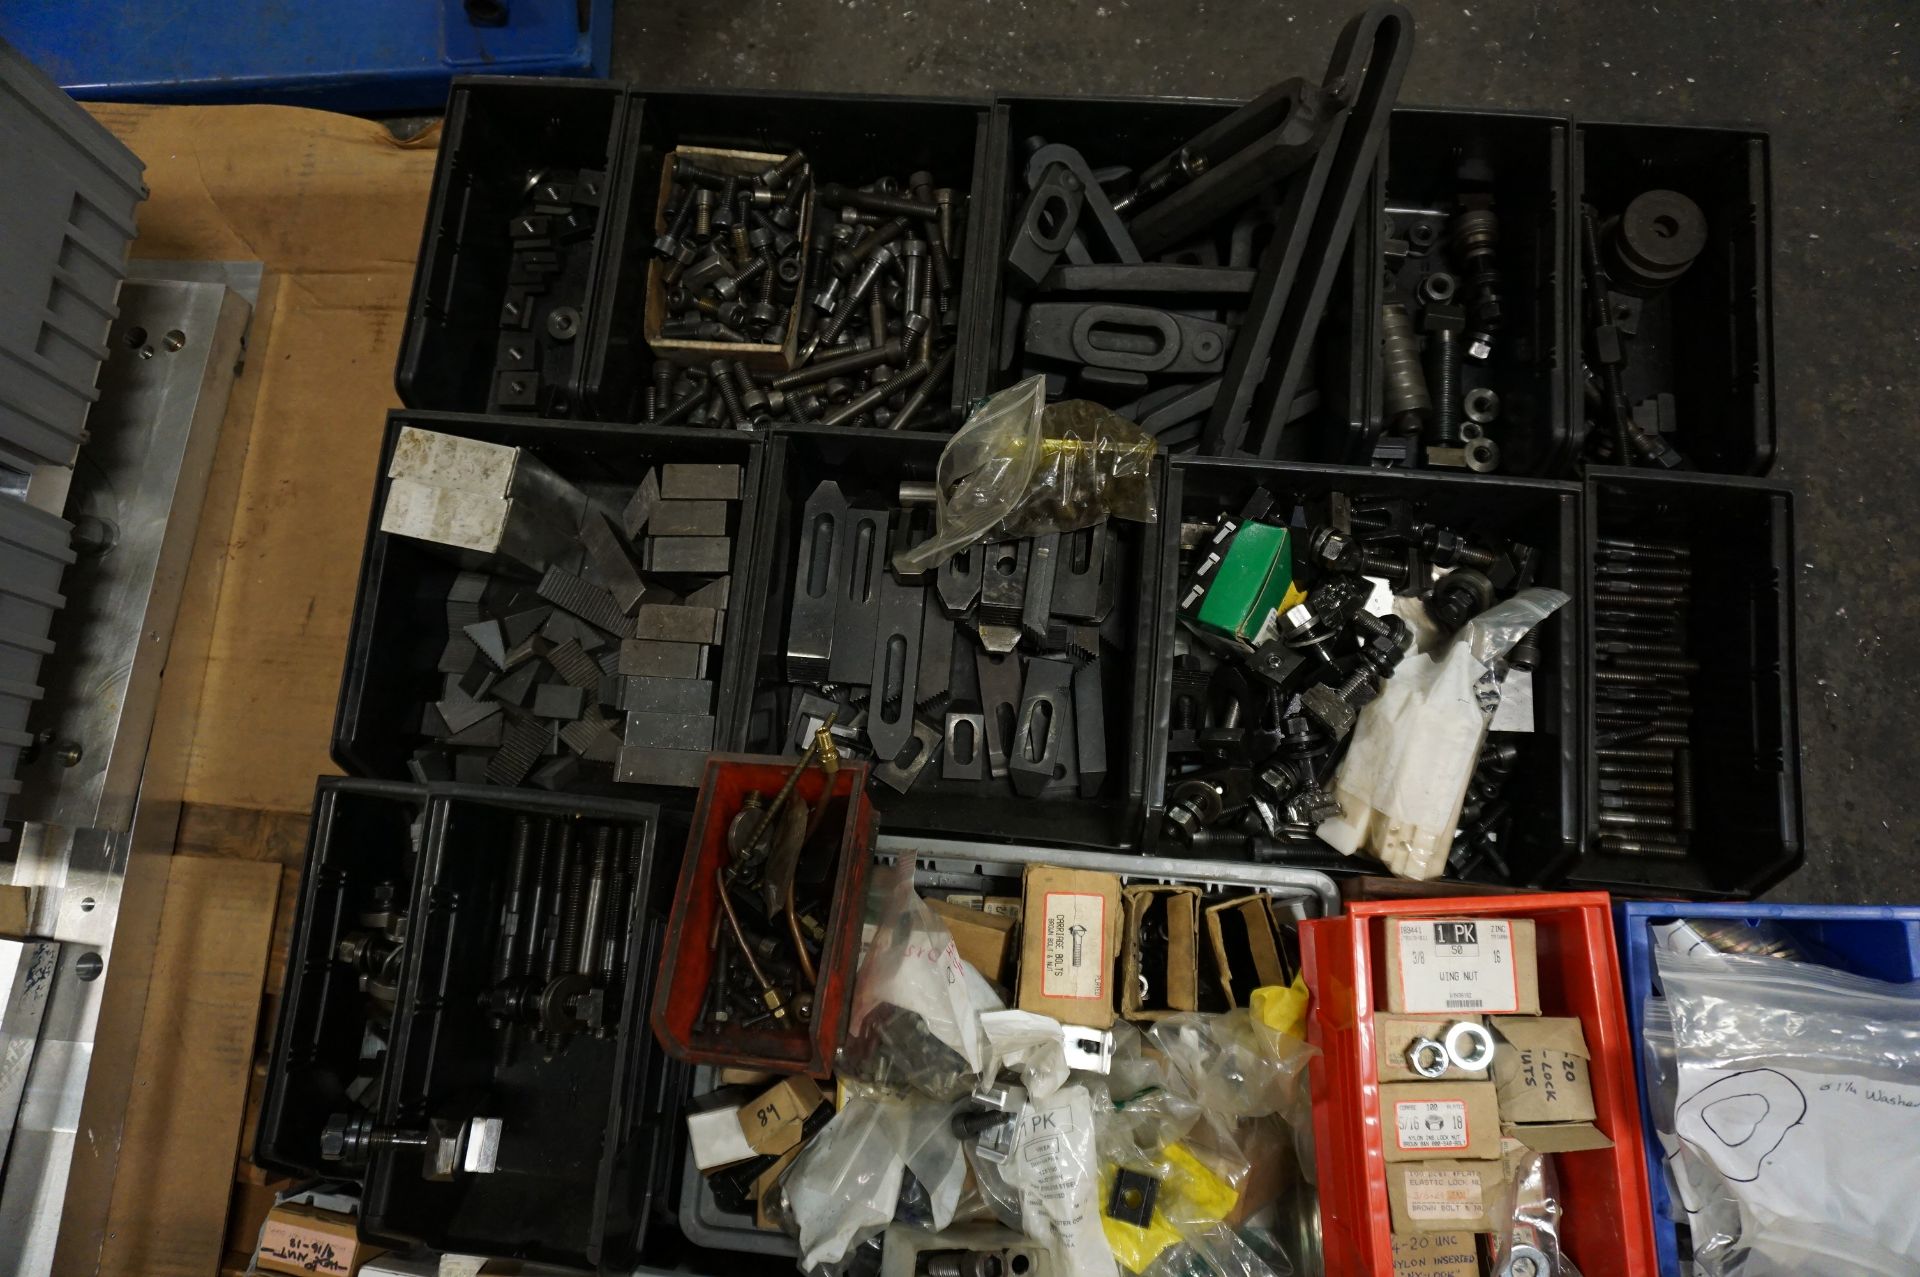 LARGE QUANTITY OF MISC. HARDWARE TO INCLUDE BUT NOT LIMITED TO: STEP BLOCKS, NUTS, MBOLTS AND - Image 3 of 8